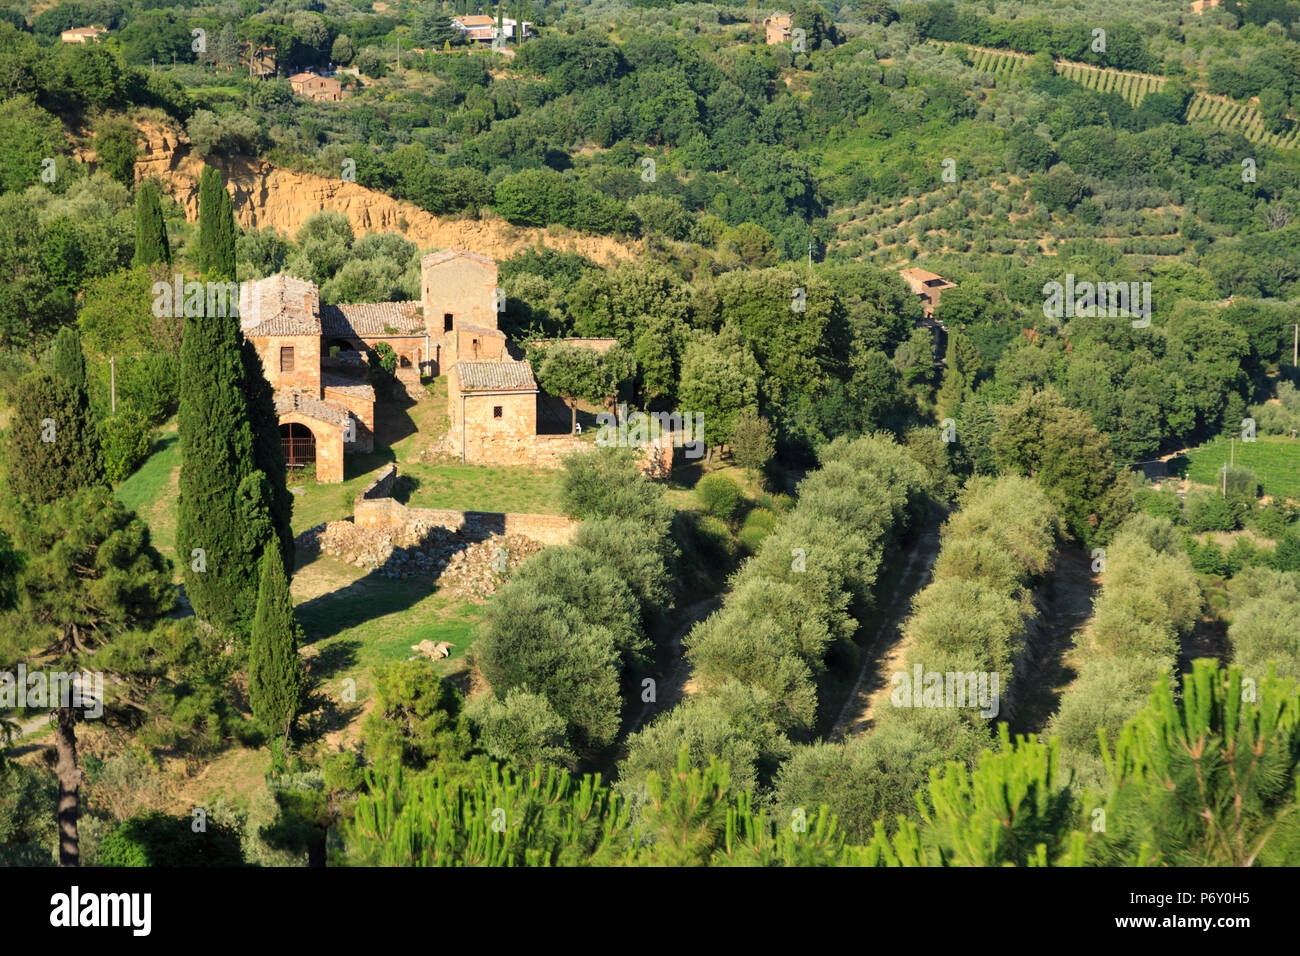 Italy, Tuscany, Siena district, Val di Chiana, Montepulciano, view from ramparts Stock Photo